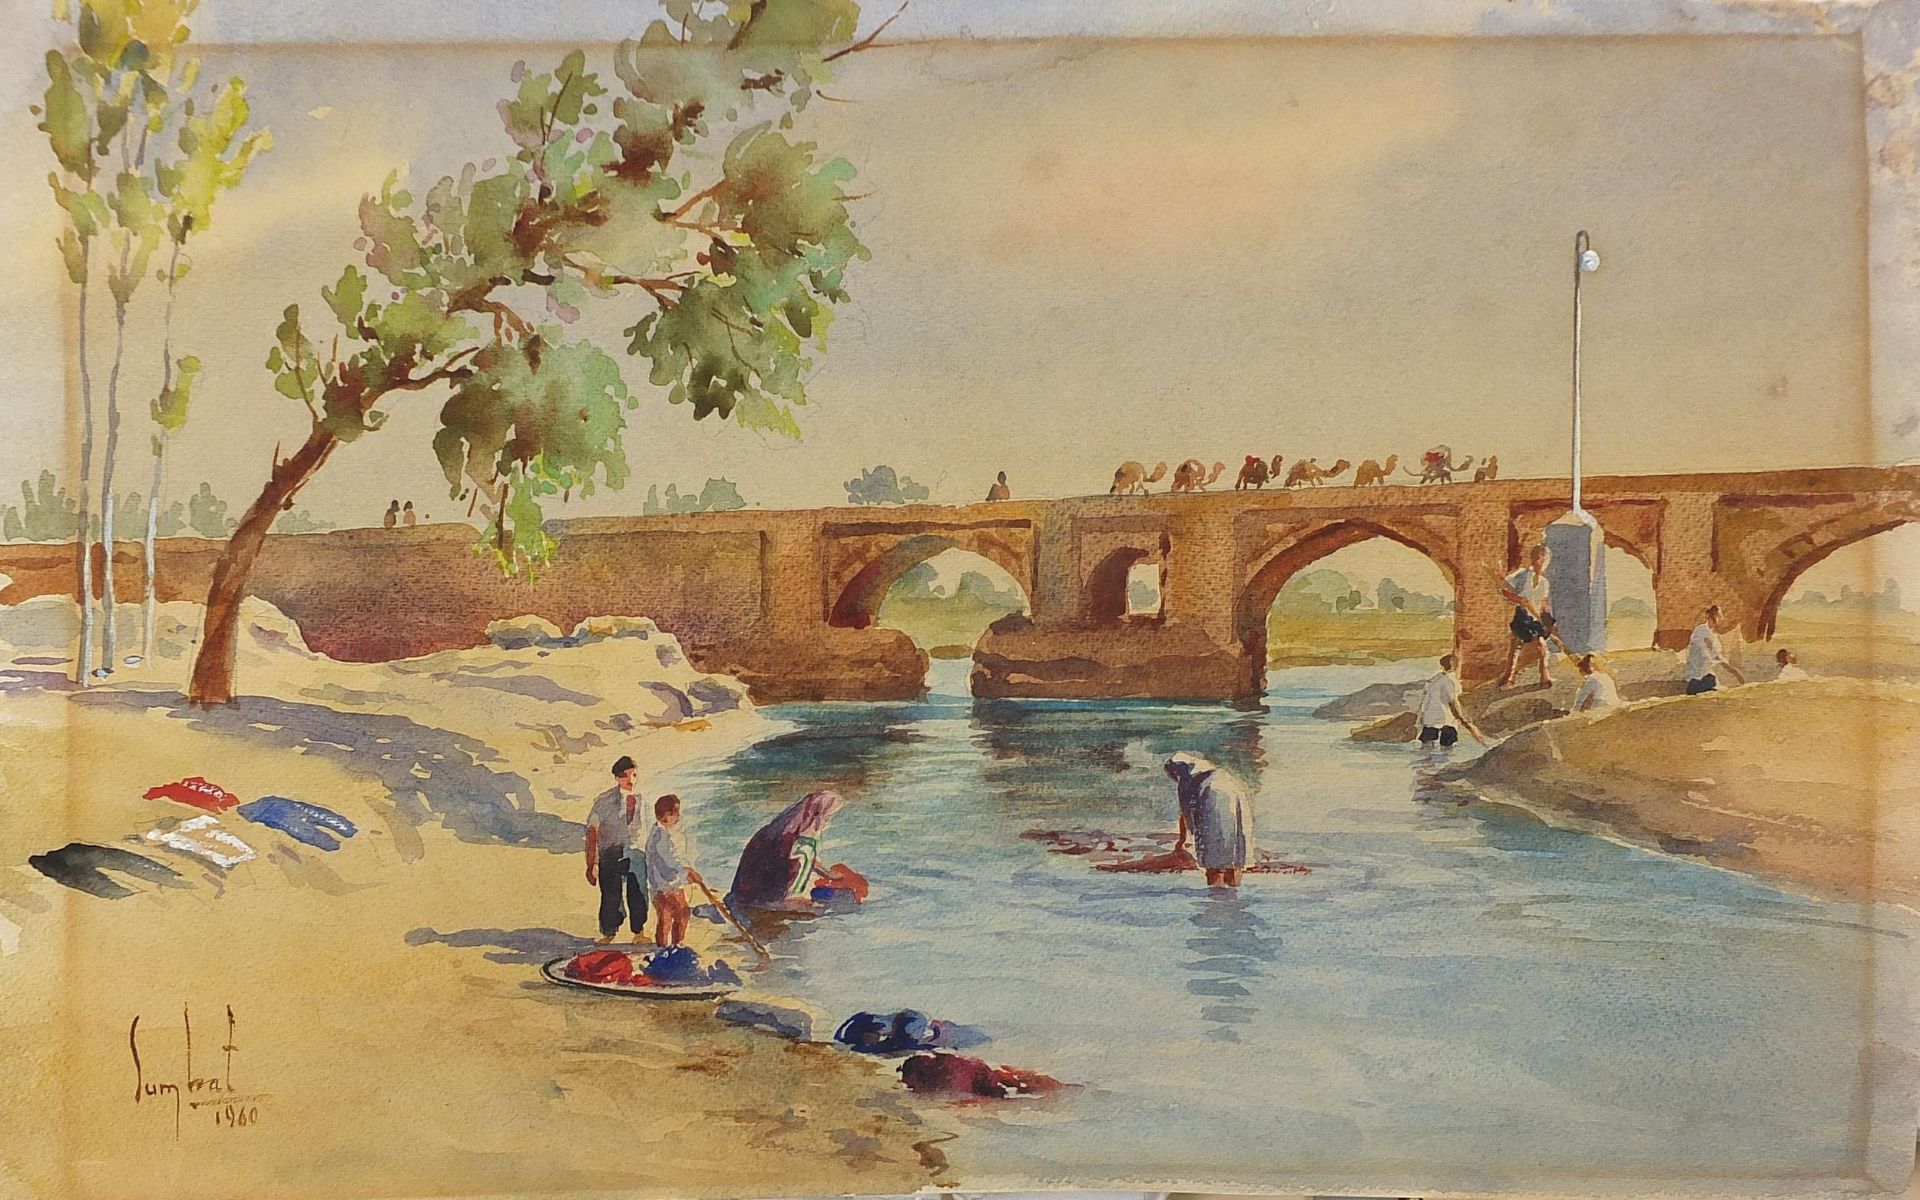 Sumbat Kureghian - River scene with camels and figures, Iranian heightened watercolour on card, - Image 2 of 5